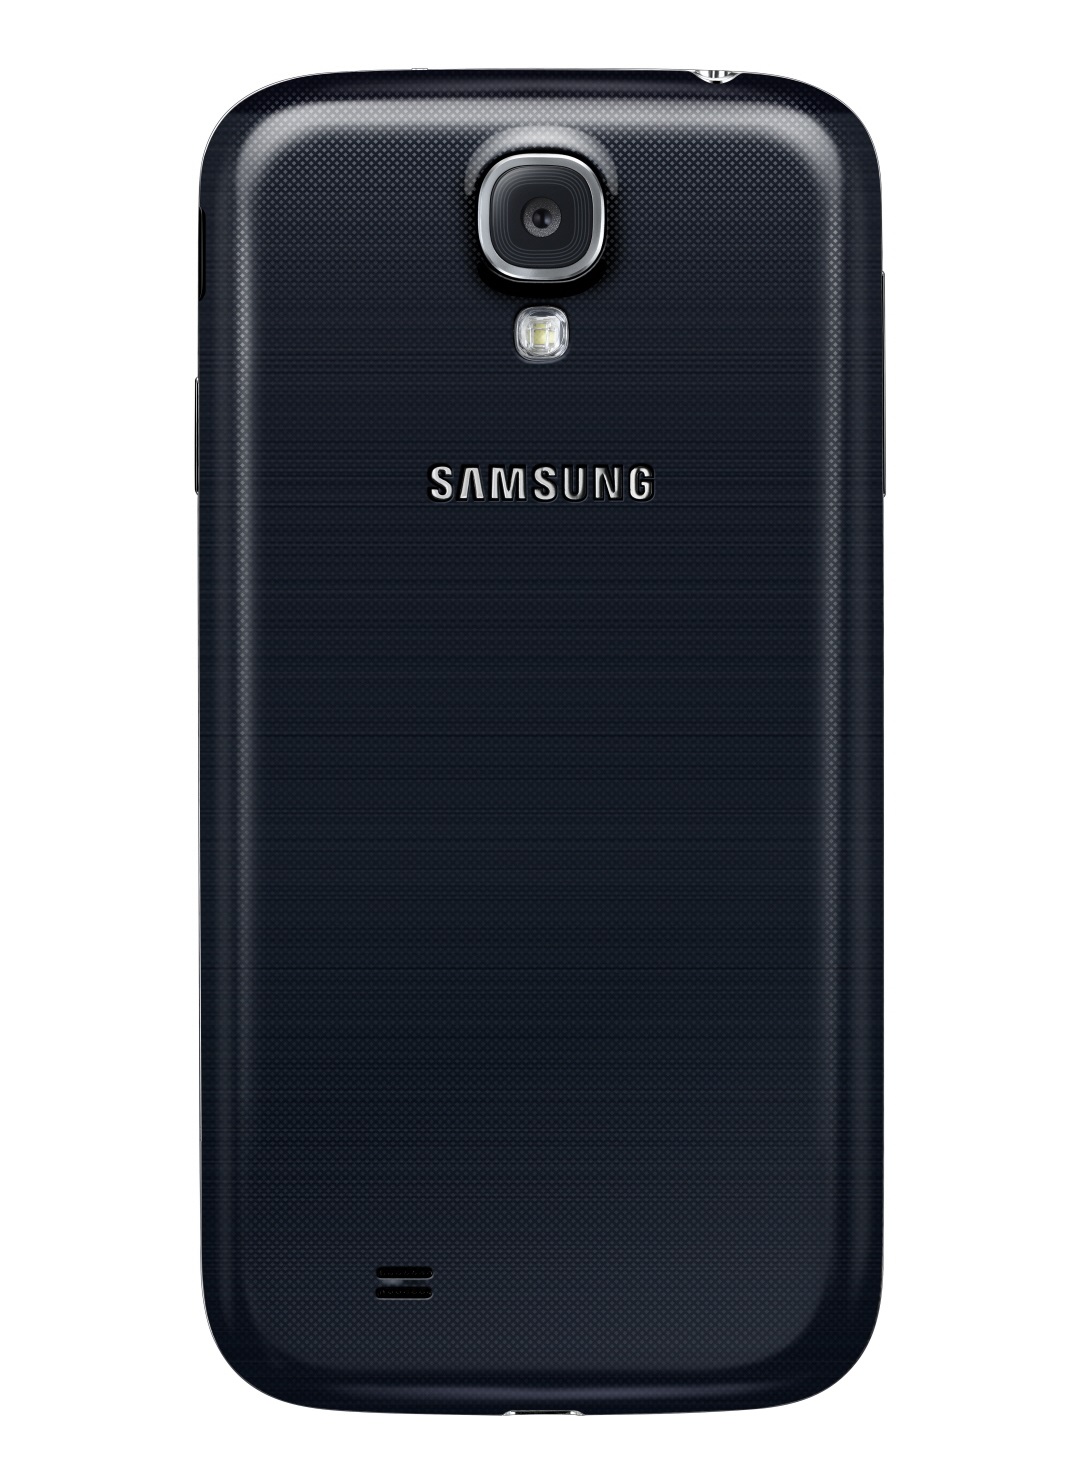 Samsung I9500 Galaxy S4 Full Phone Specifications, Comparison